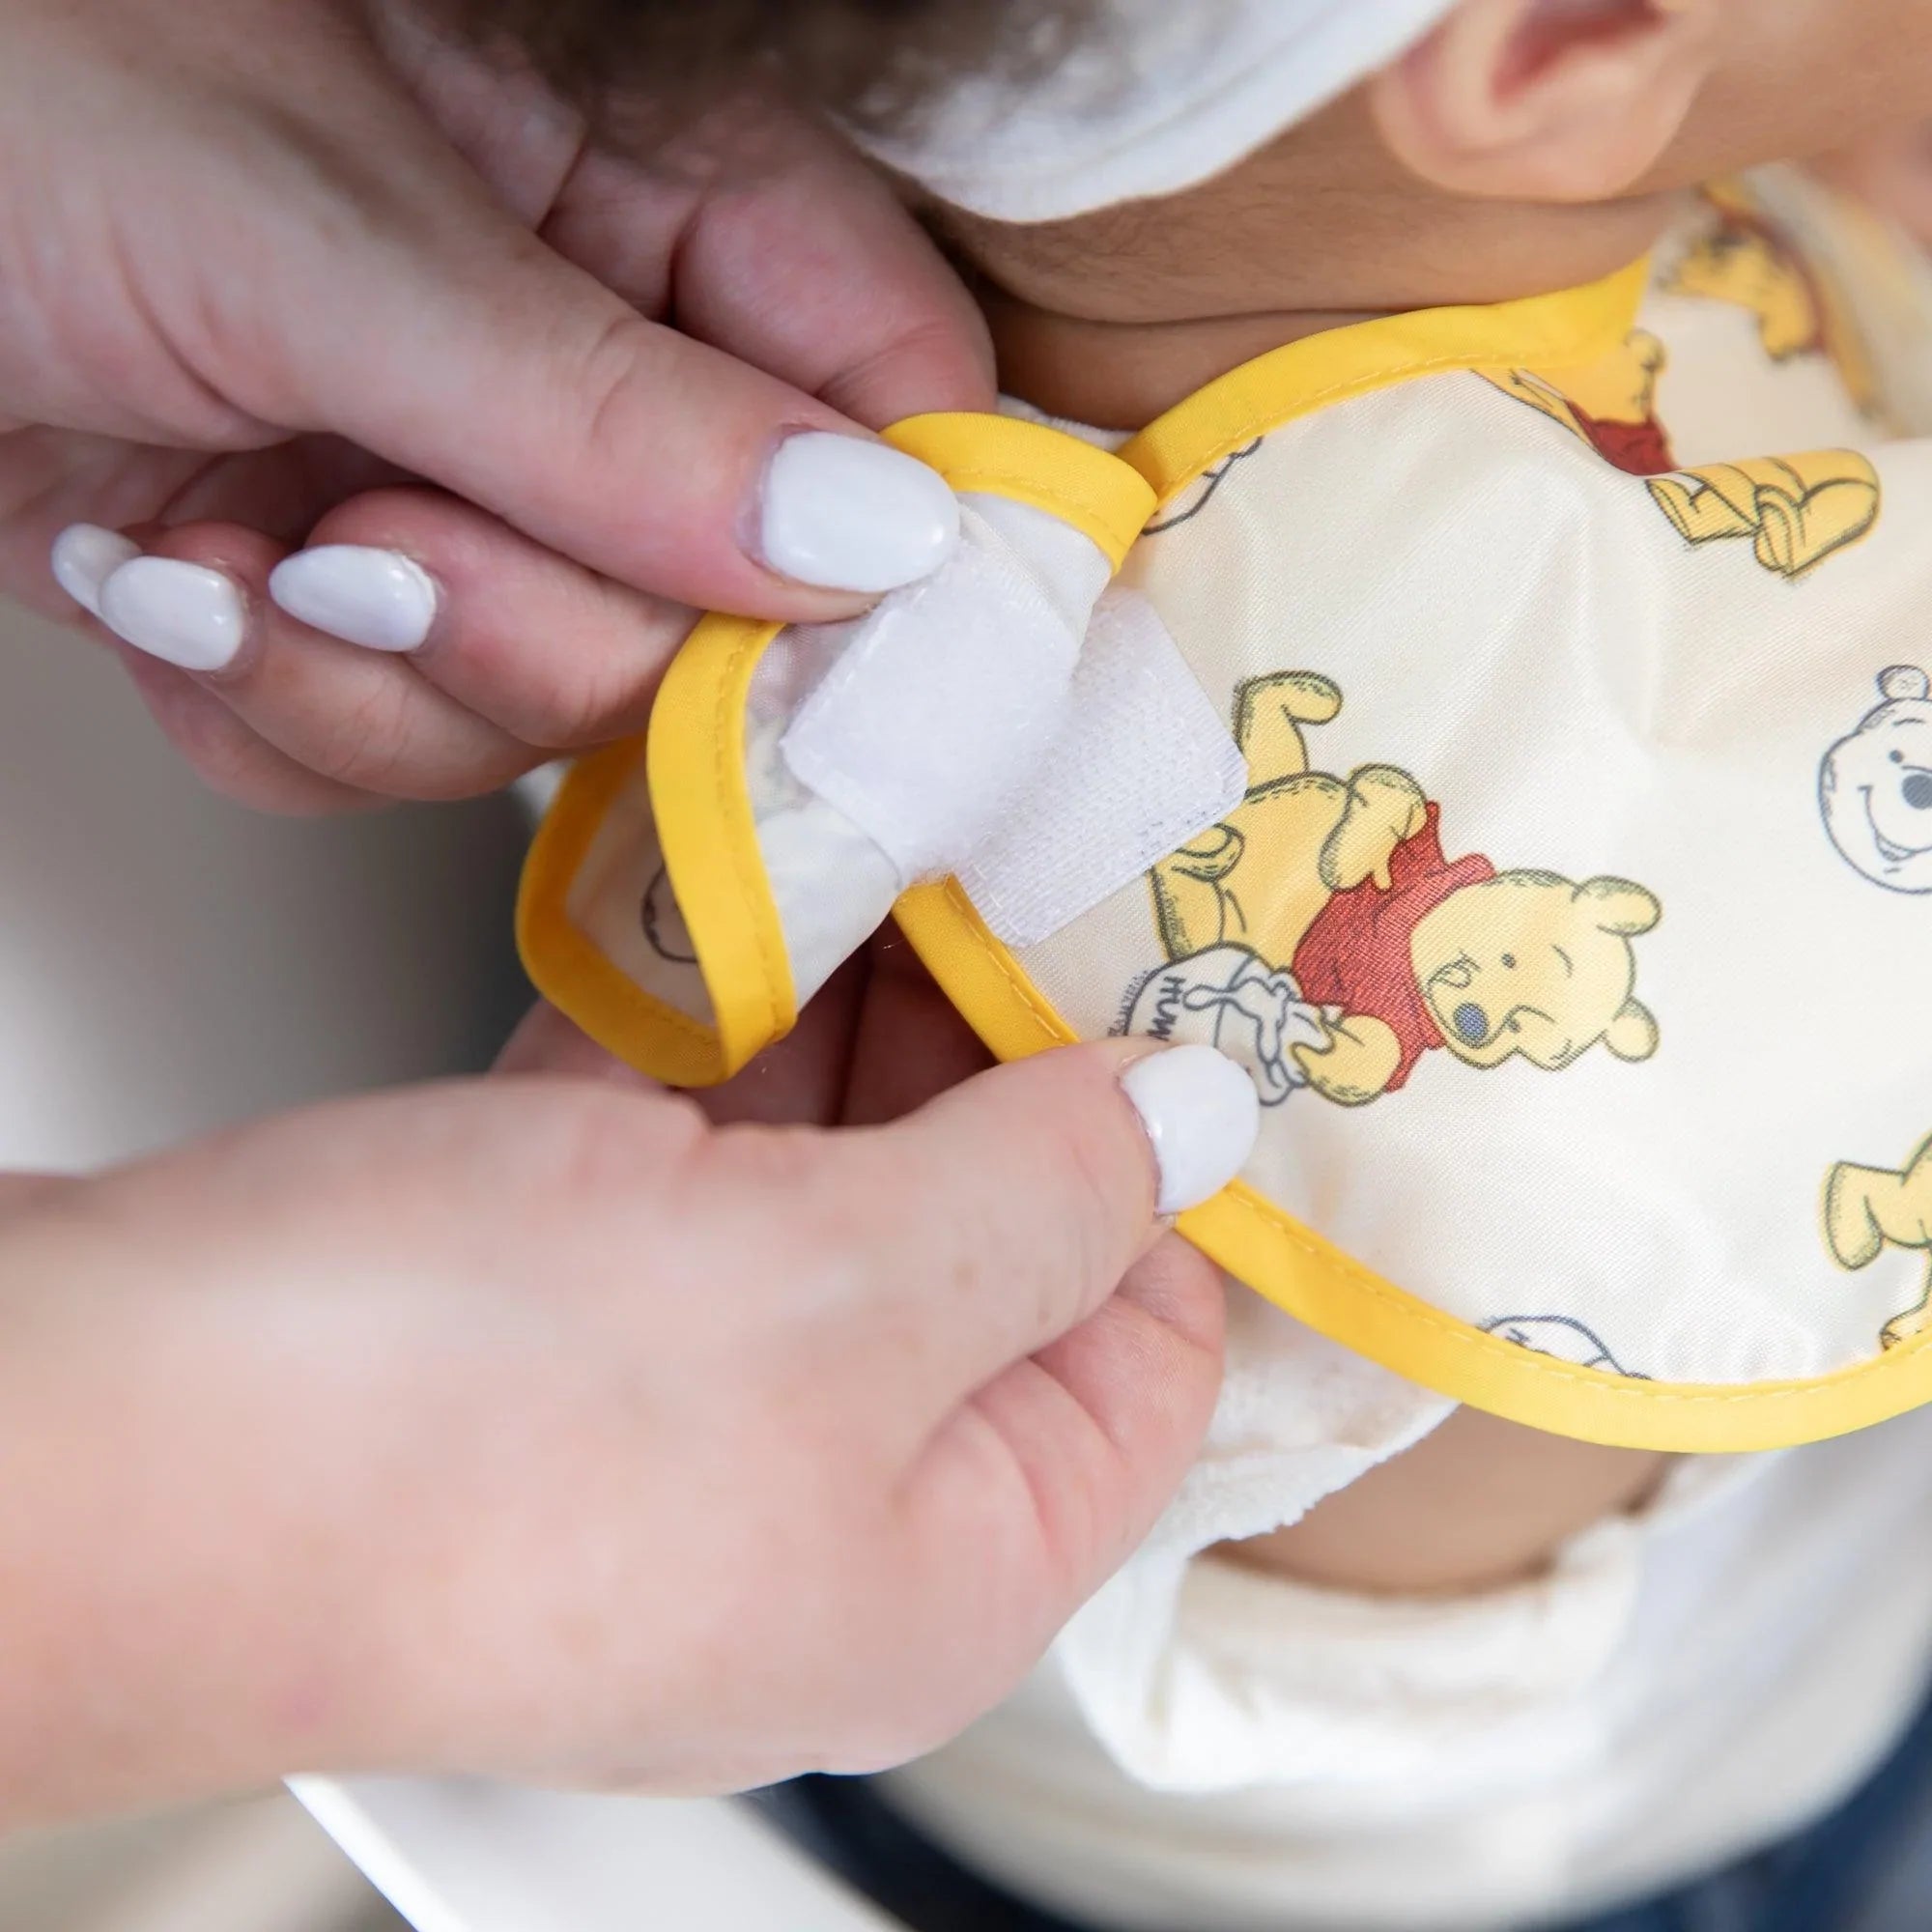 SuperBib® 3 Pack: Pooh Bear and Friends - Bumkins